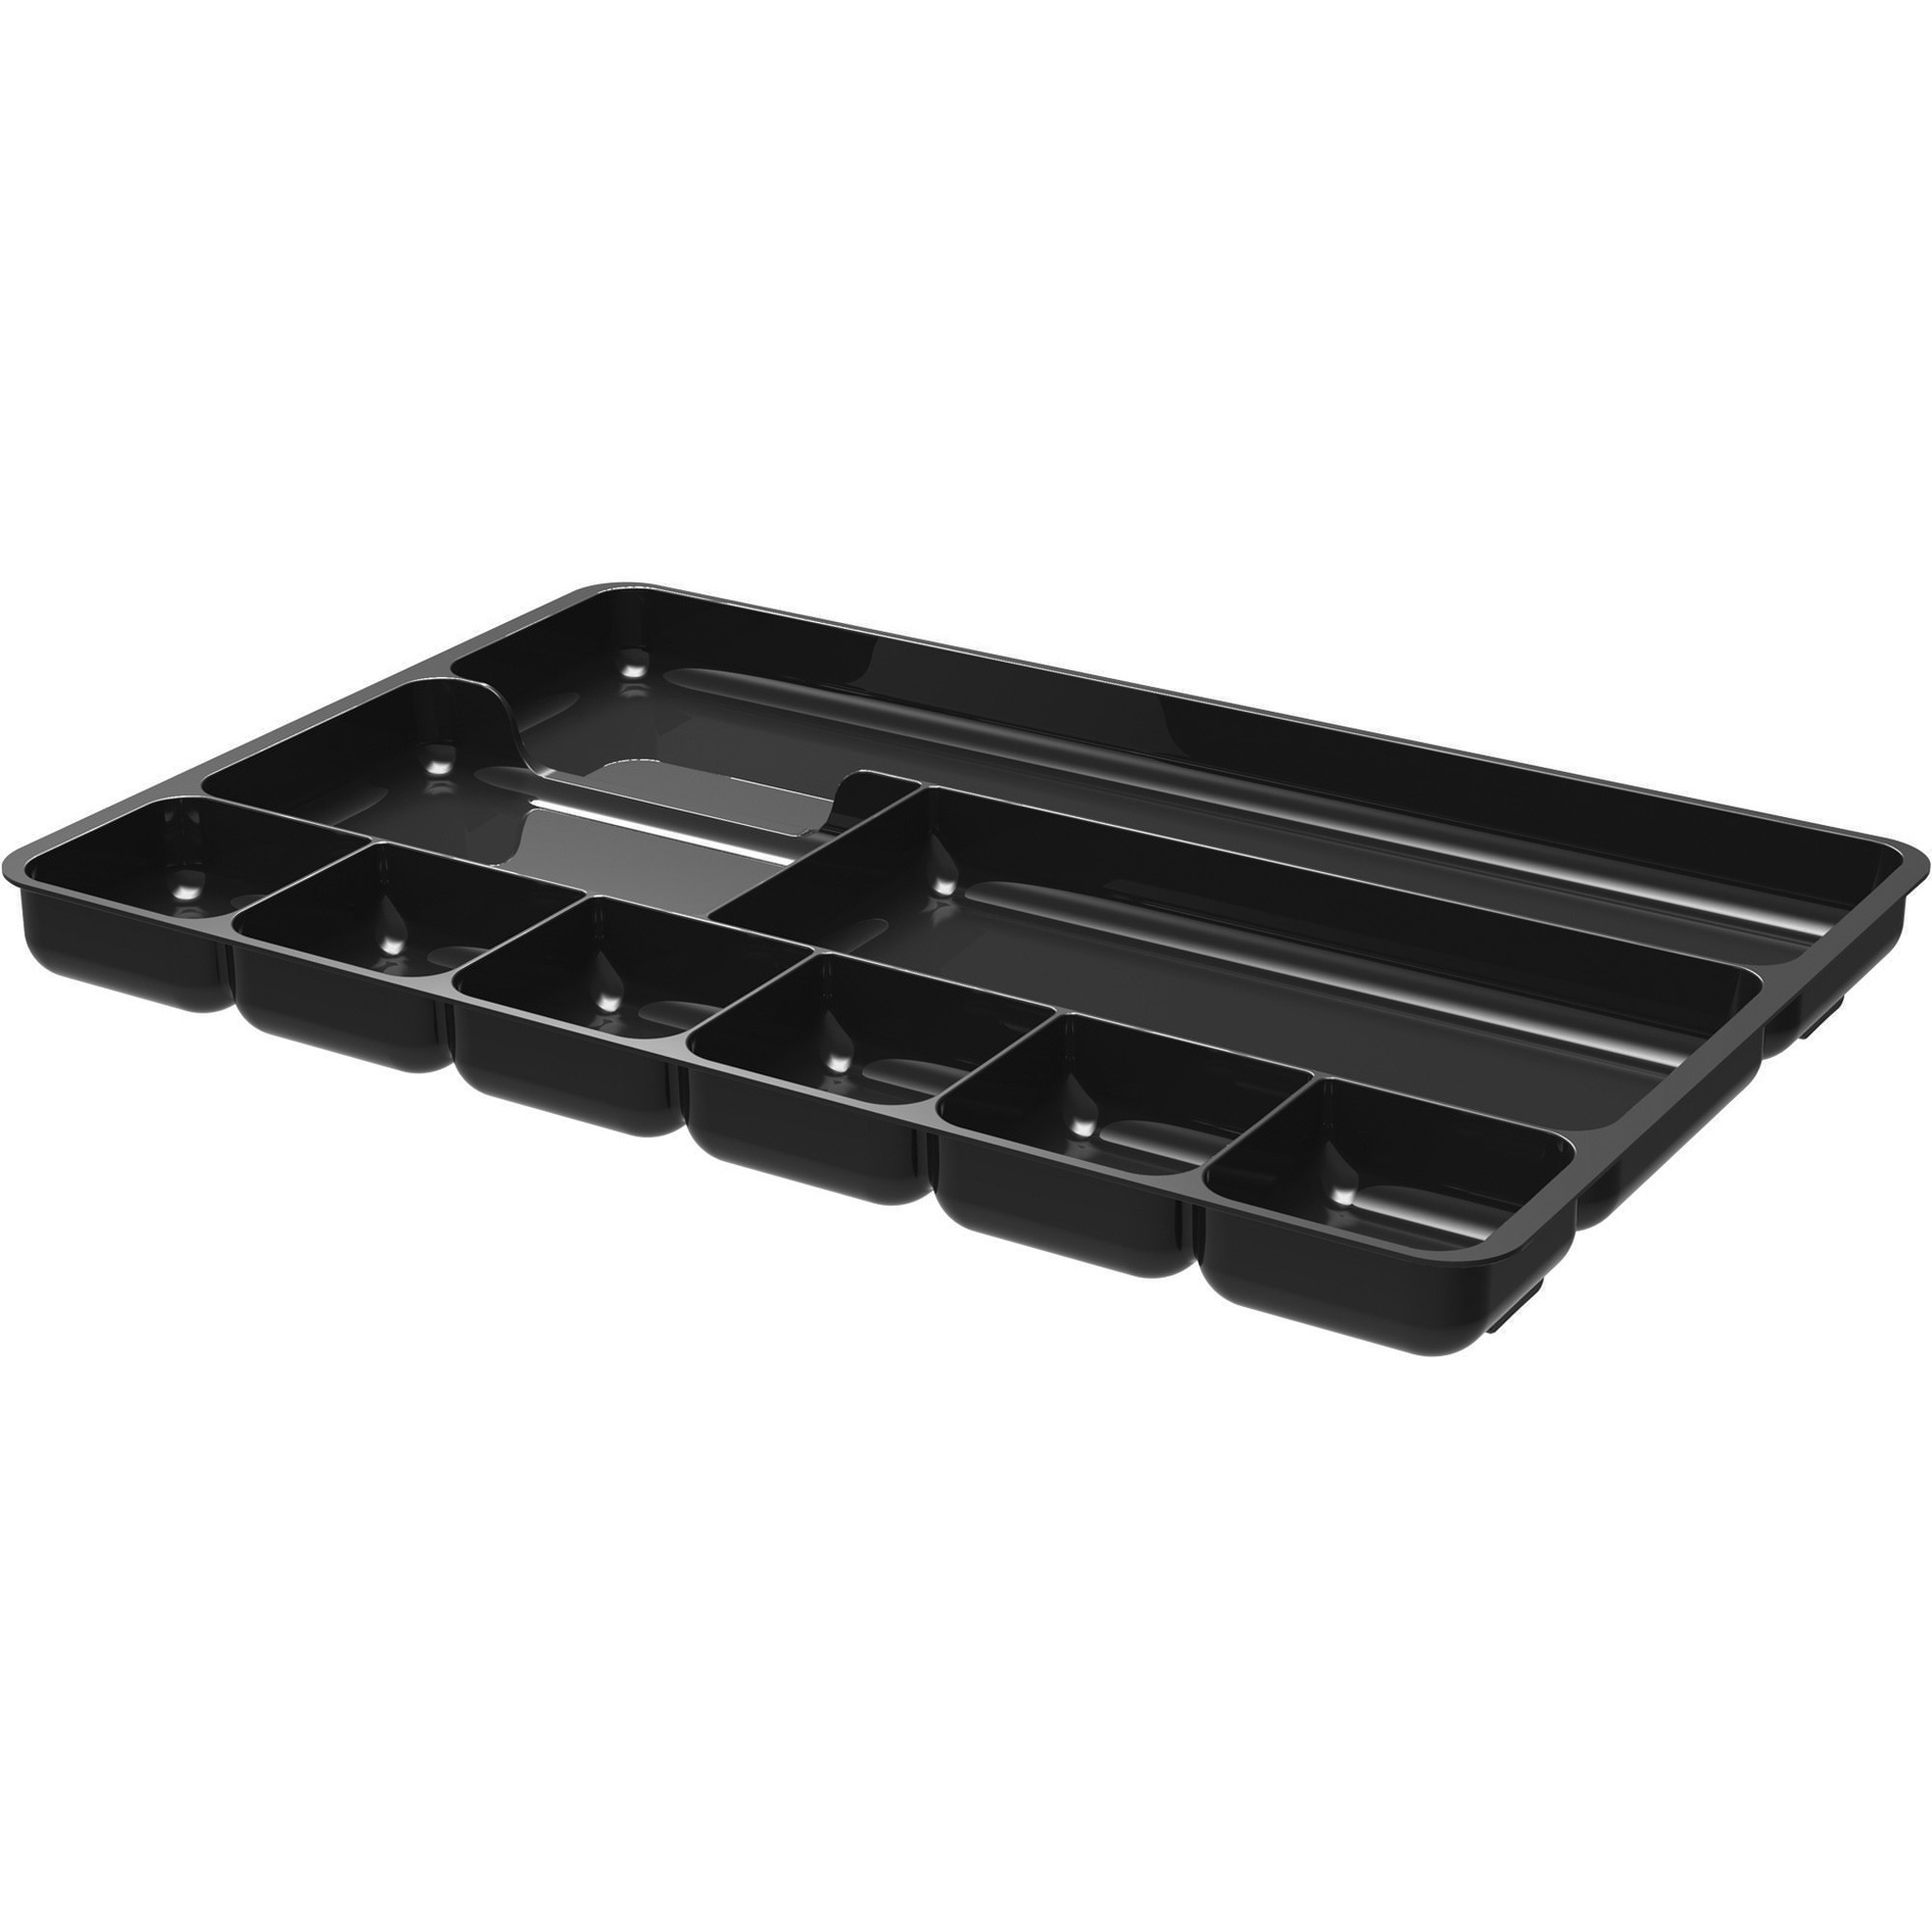 Deflecto Sustainable Office Drawer Organizer